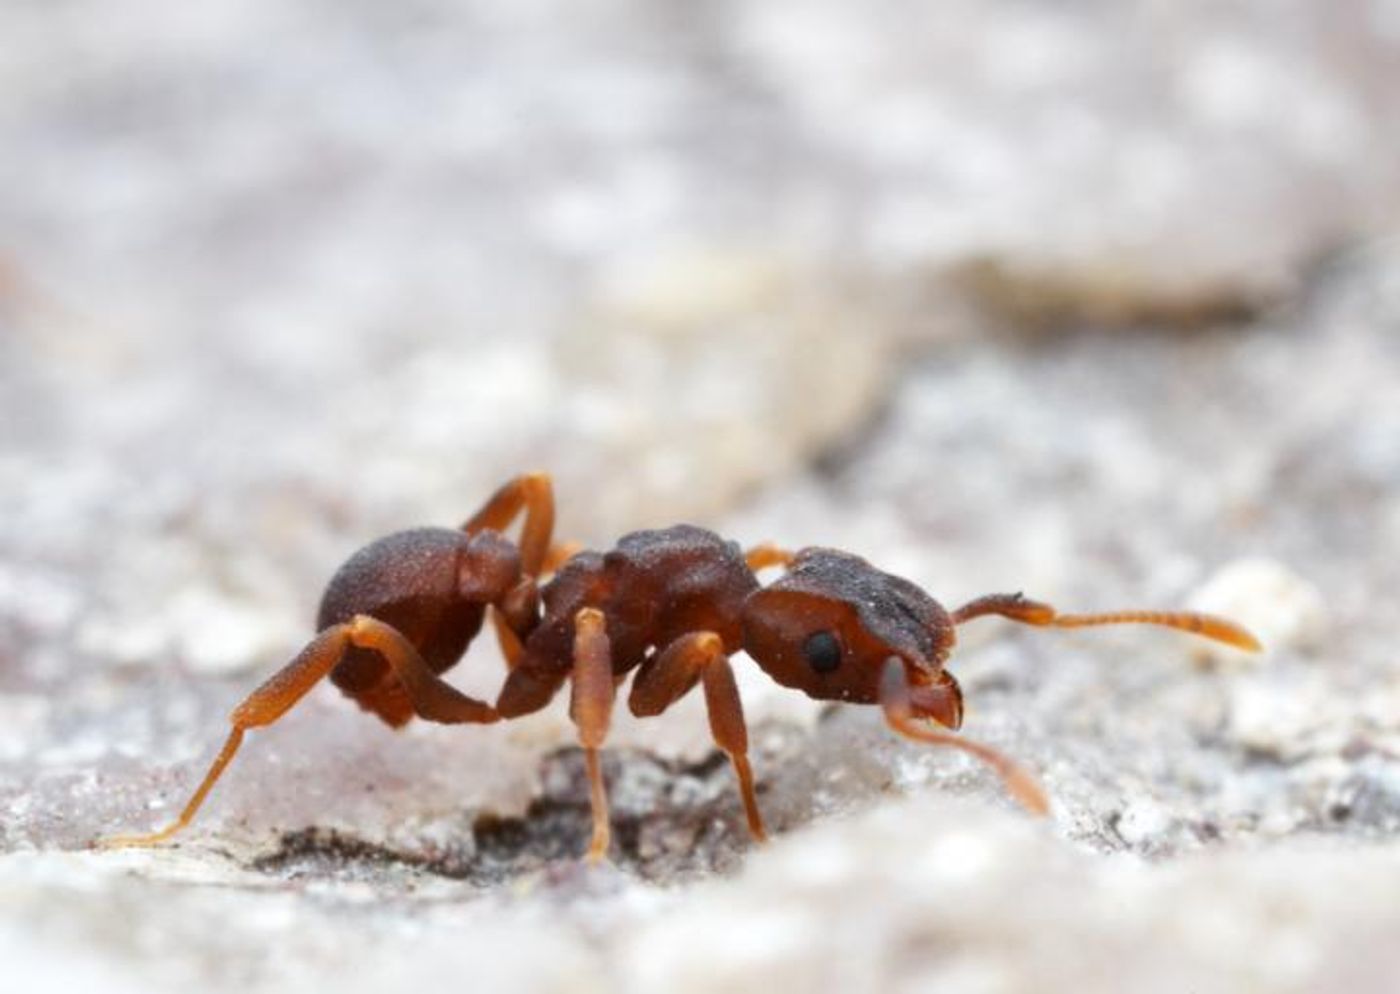 This is a Cyphomyrmex ant. These fungus-growing ants harbored a microbe that made the newly discovered antibiotic cyphomycin. / Credit: Alec Wild